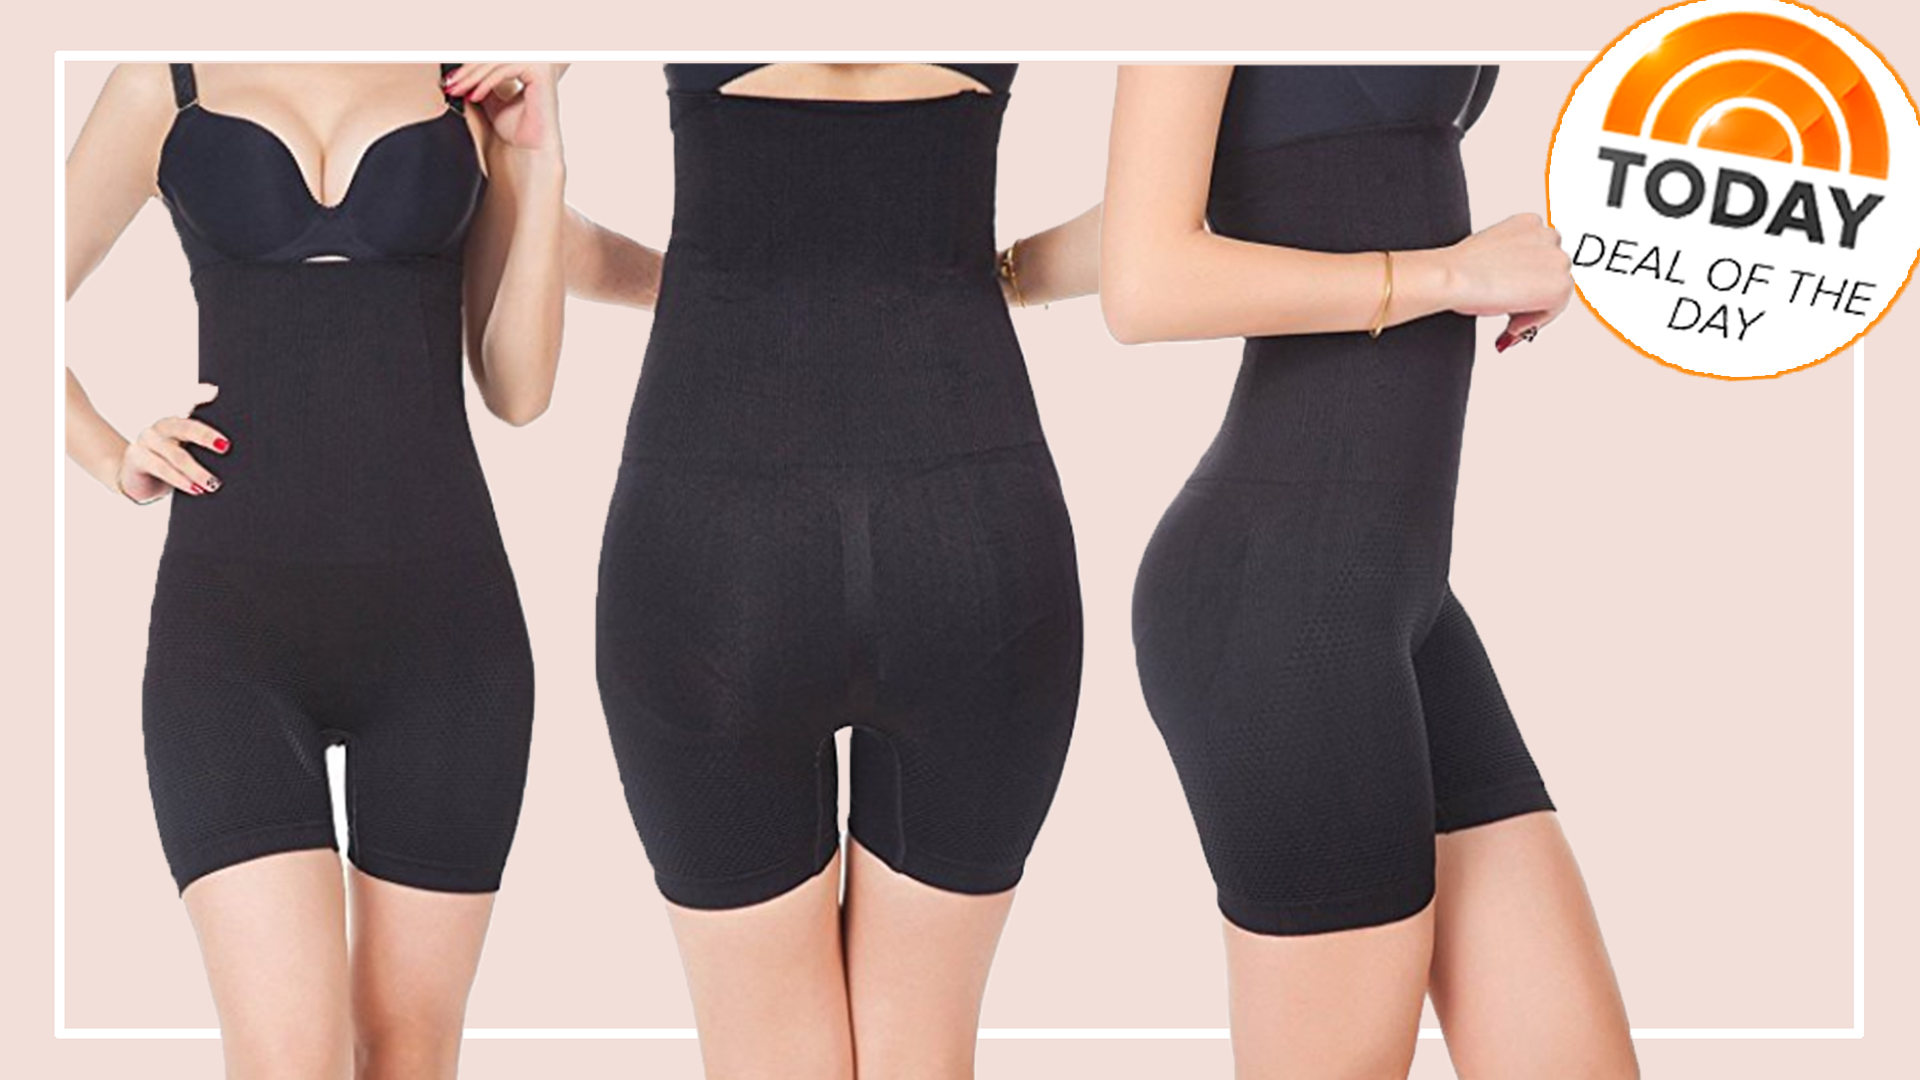 Deal Of The Day Percent Off High Waisted Shapewear Shorts